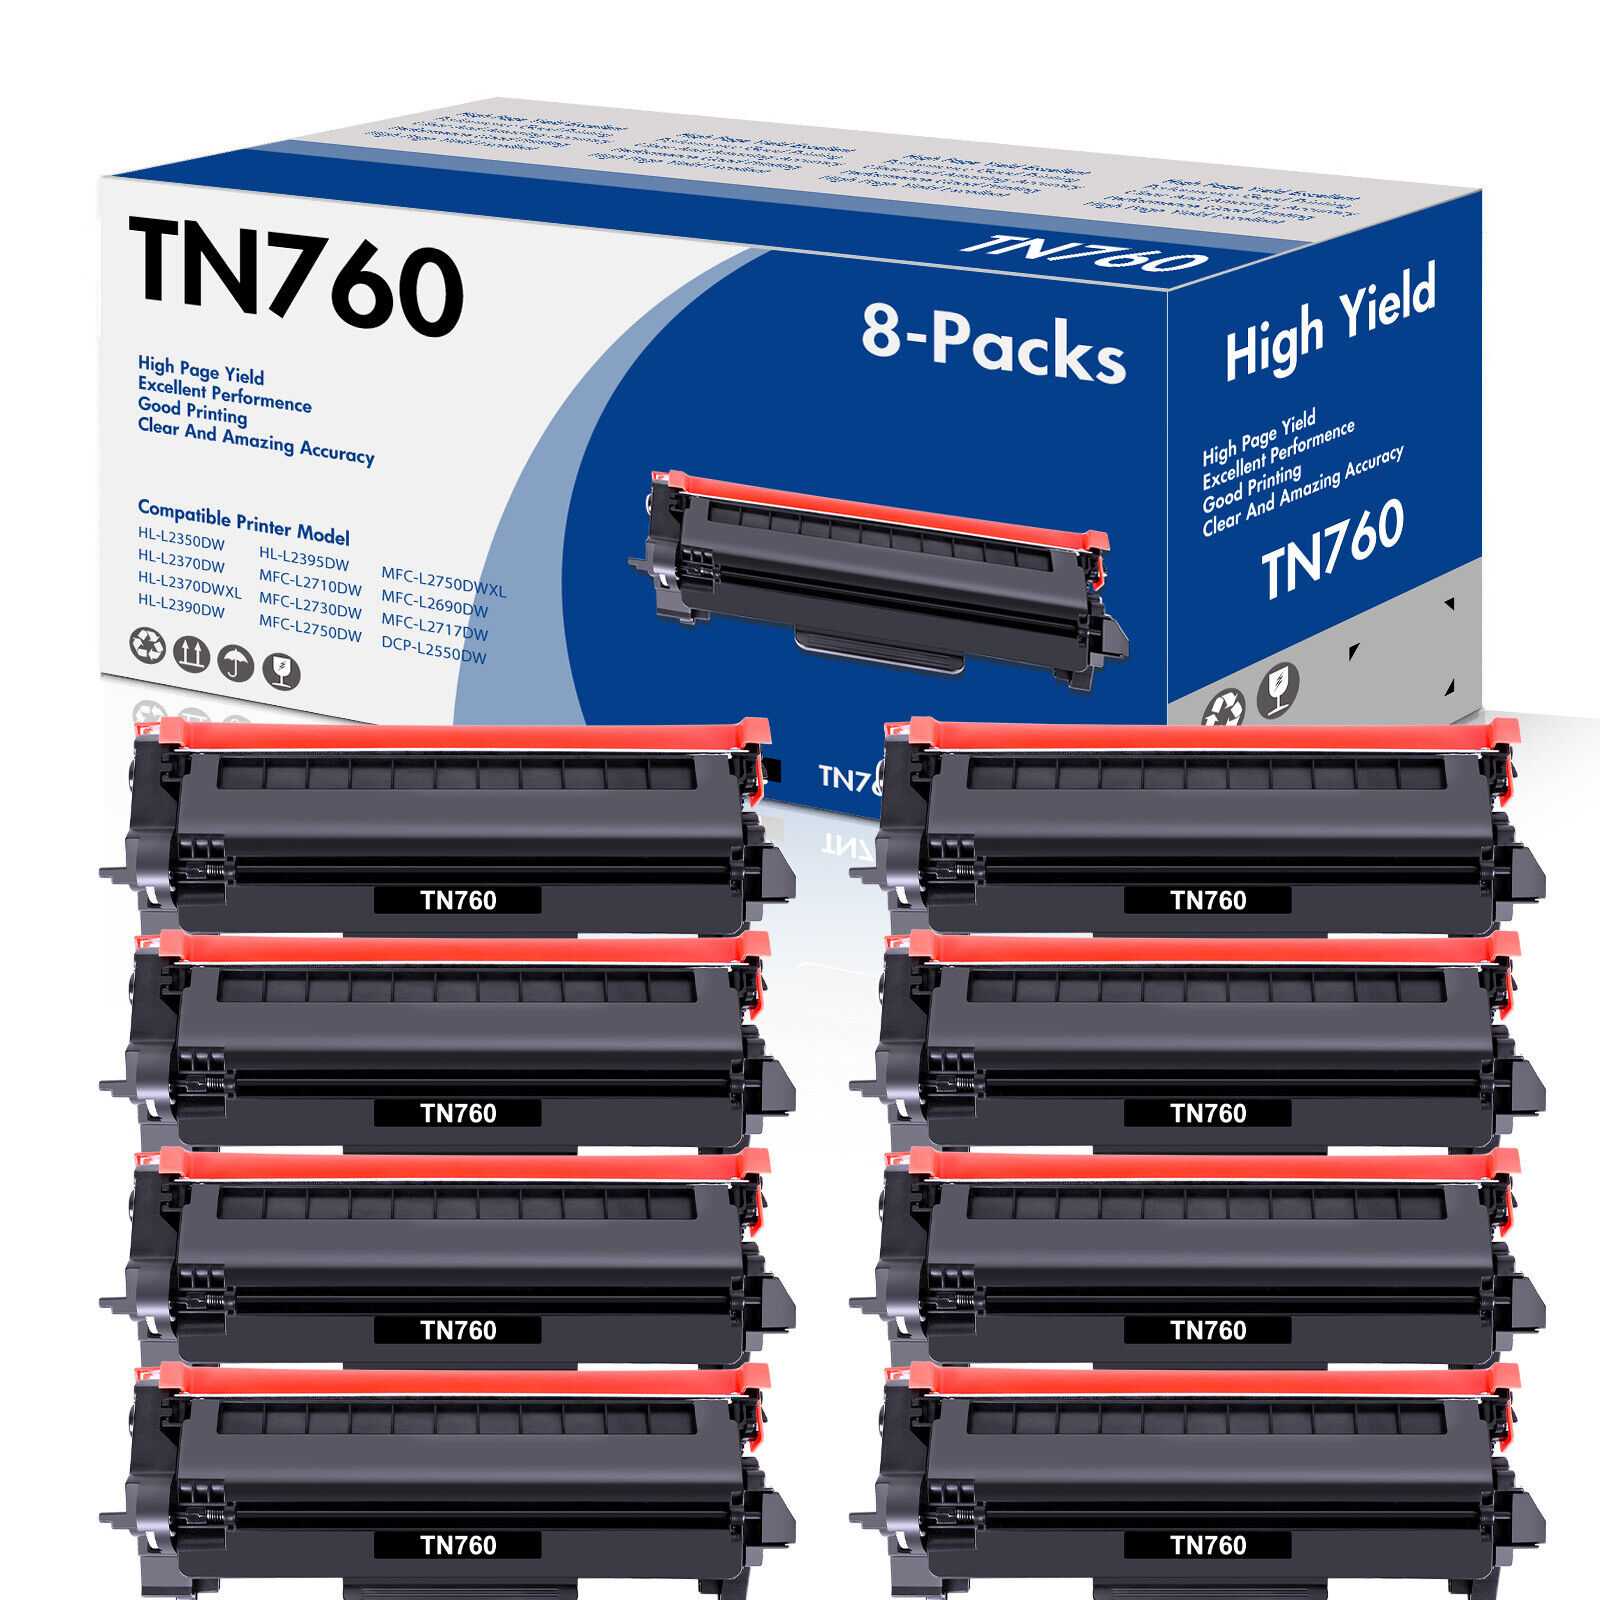 8x Toner Replacement for Brother TN760 MFC-L2750DW L2710DW DCP-L2550DW Printer